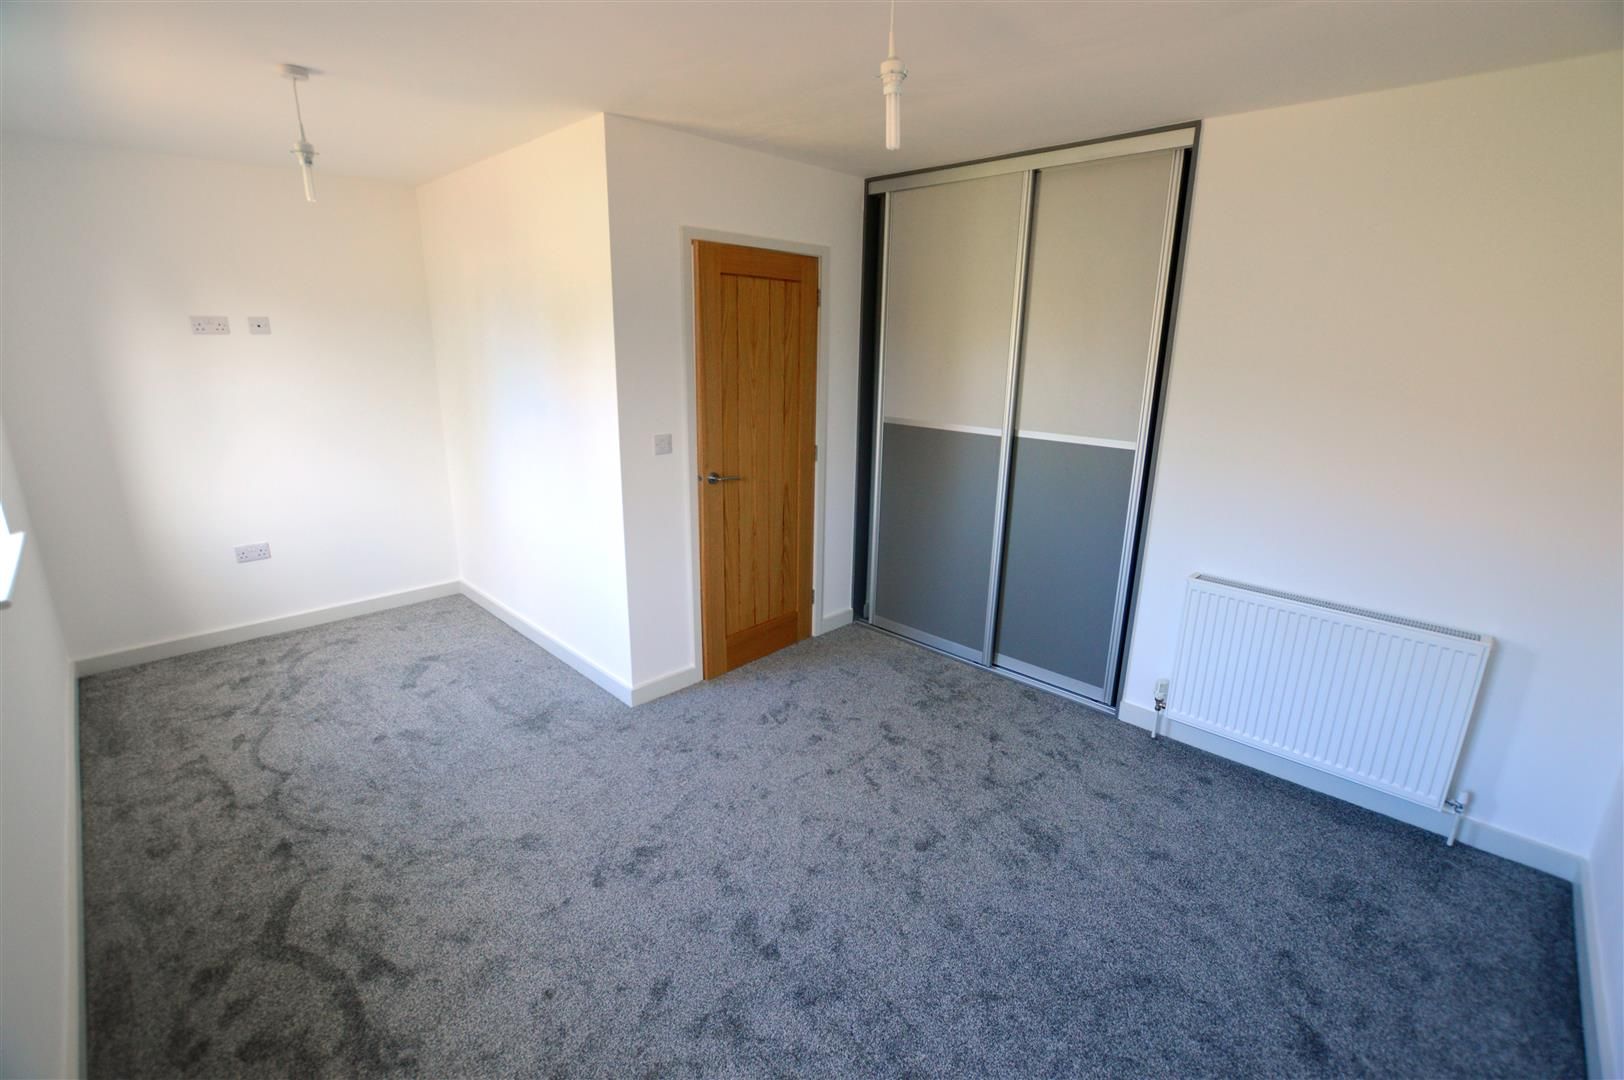 2 bed terraced for sale in Leominster 4